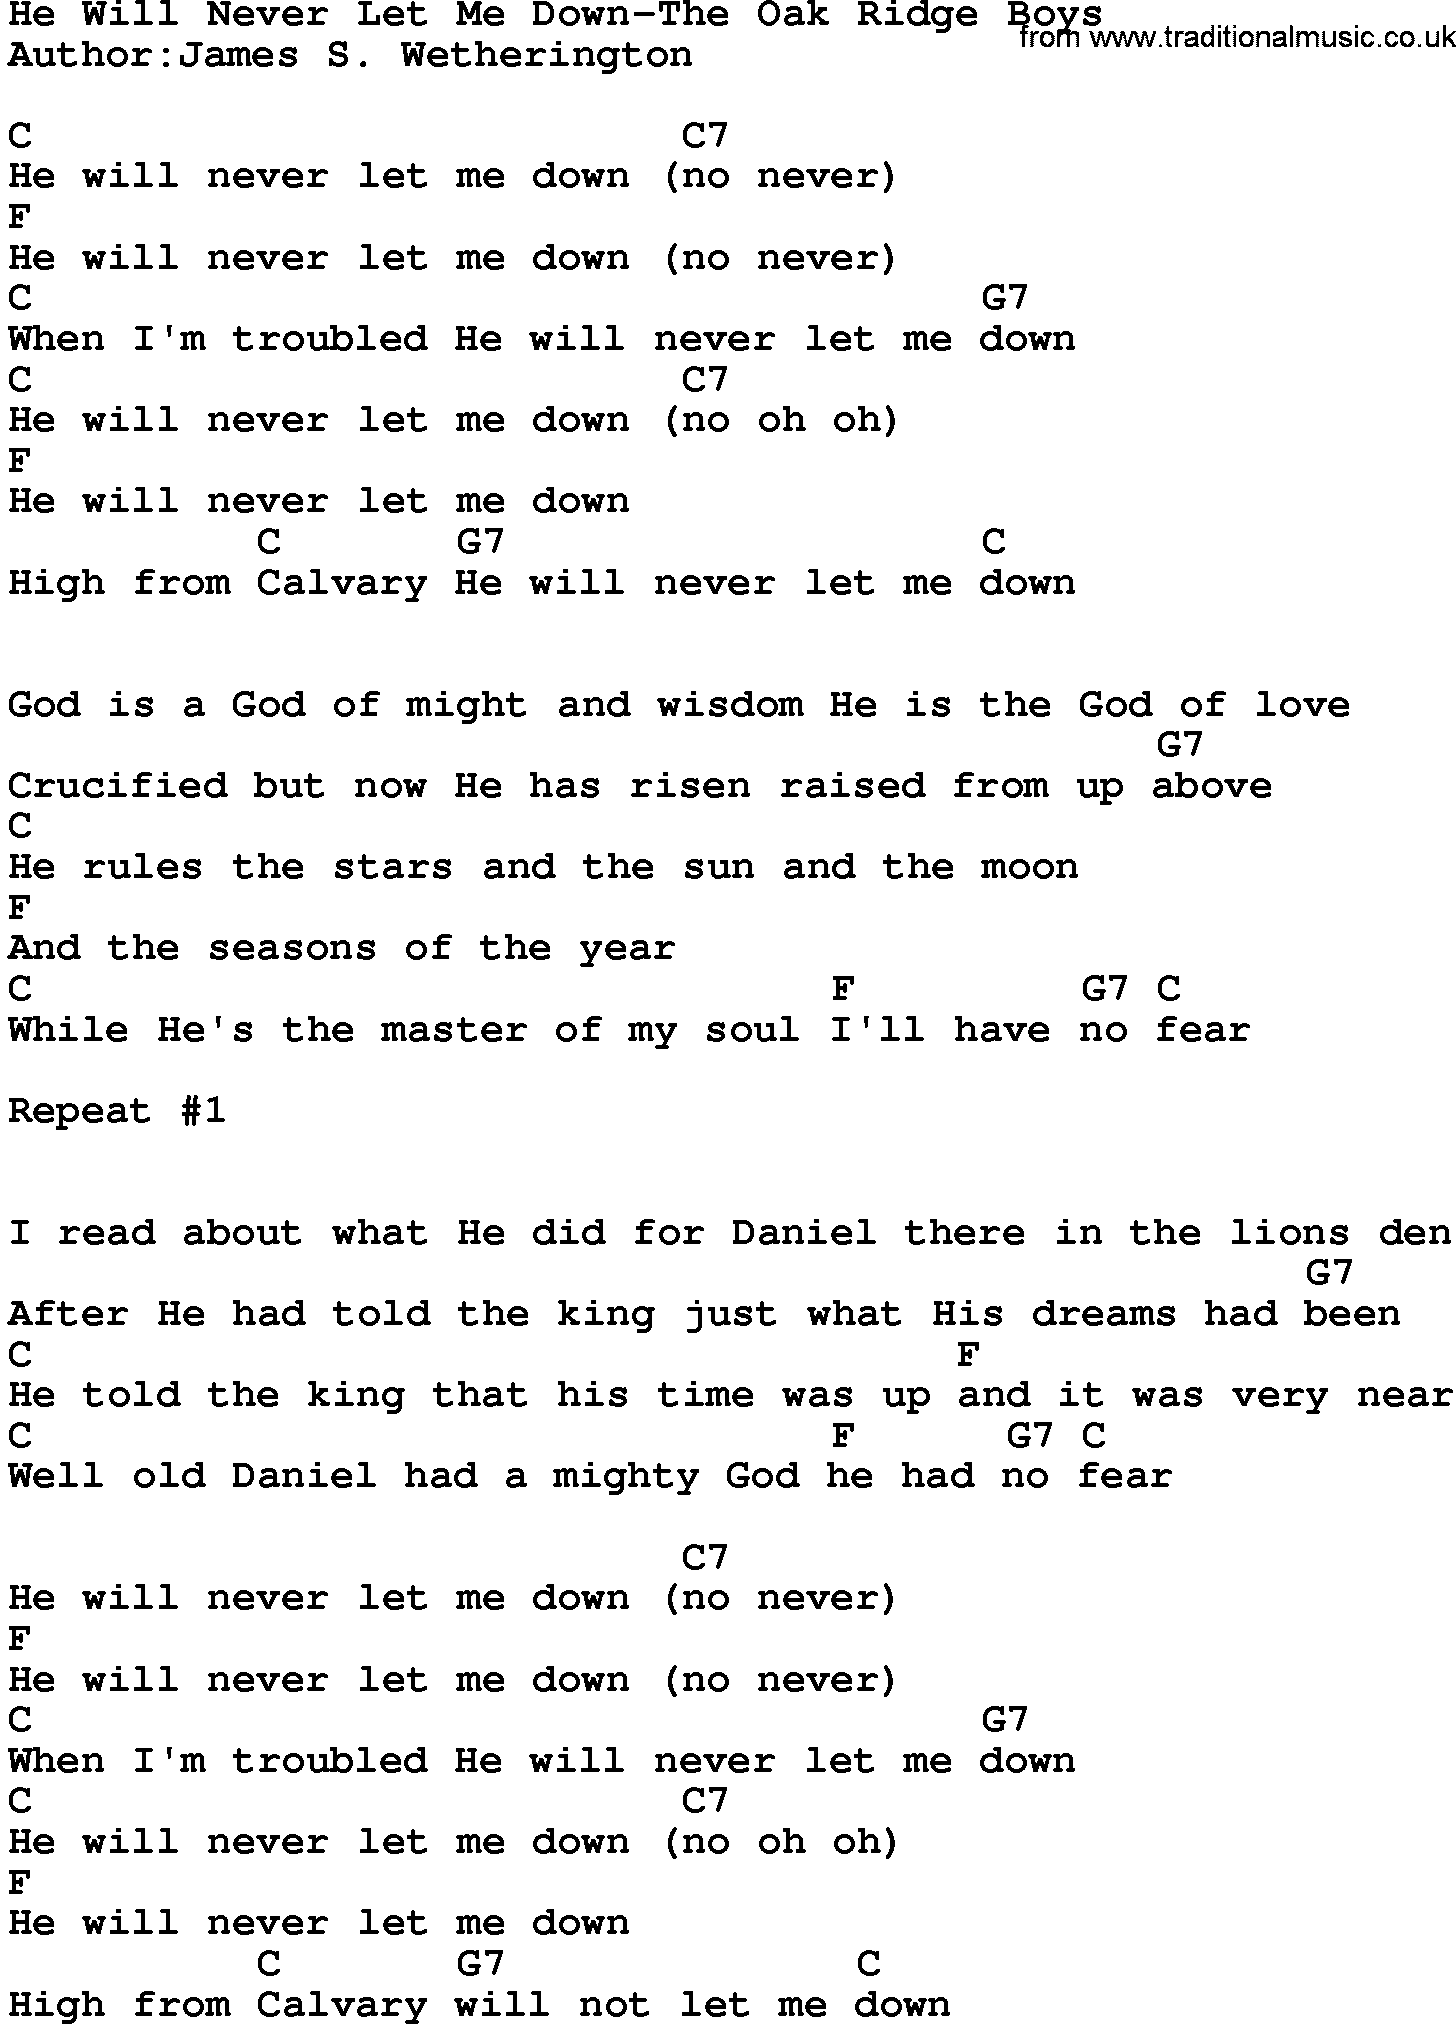 Country music song: He Will Never Let Me Down-The Oak Ridge Boys lyrics and chords